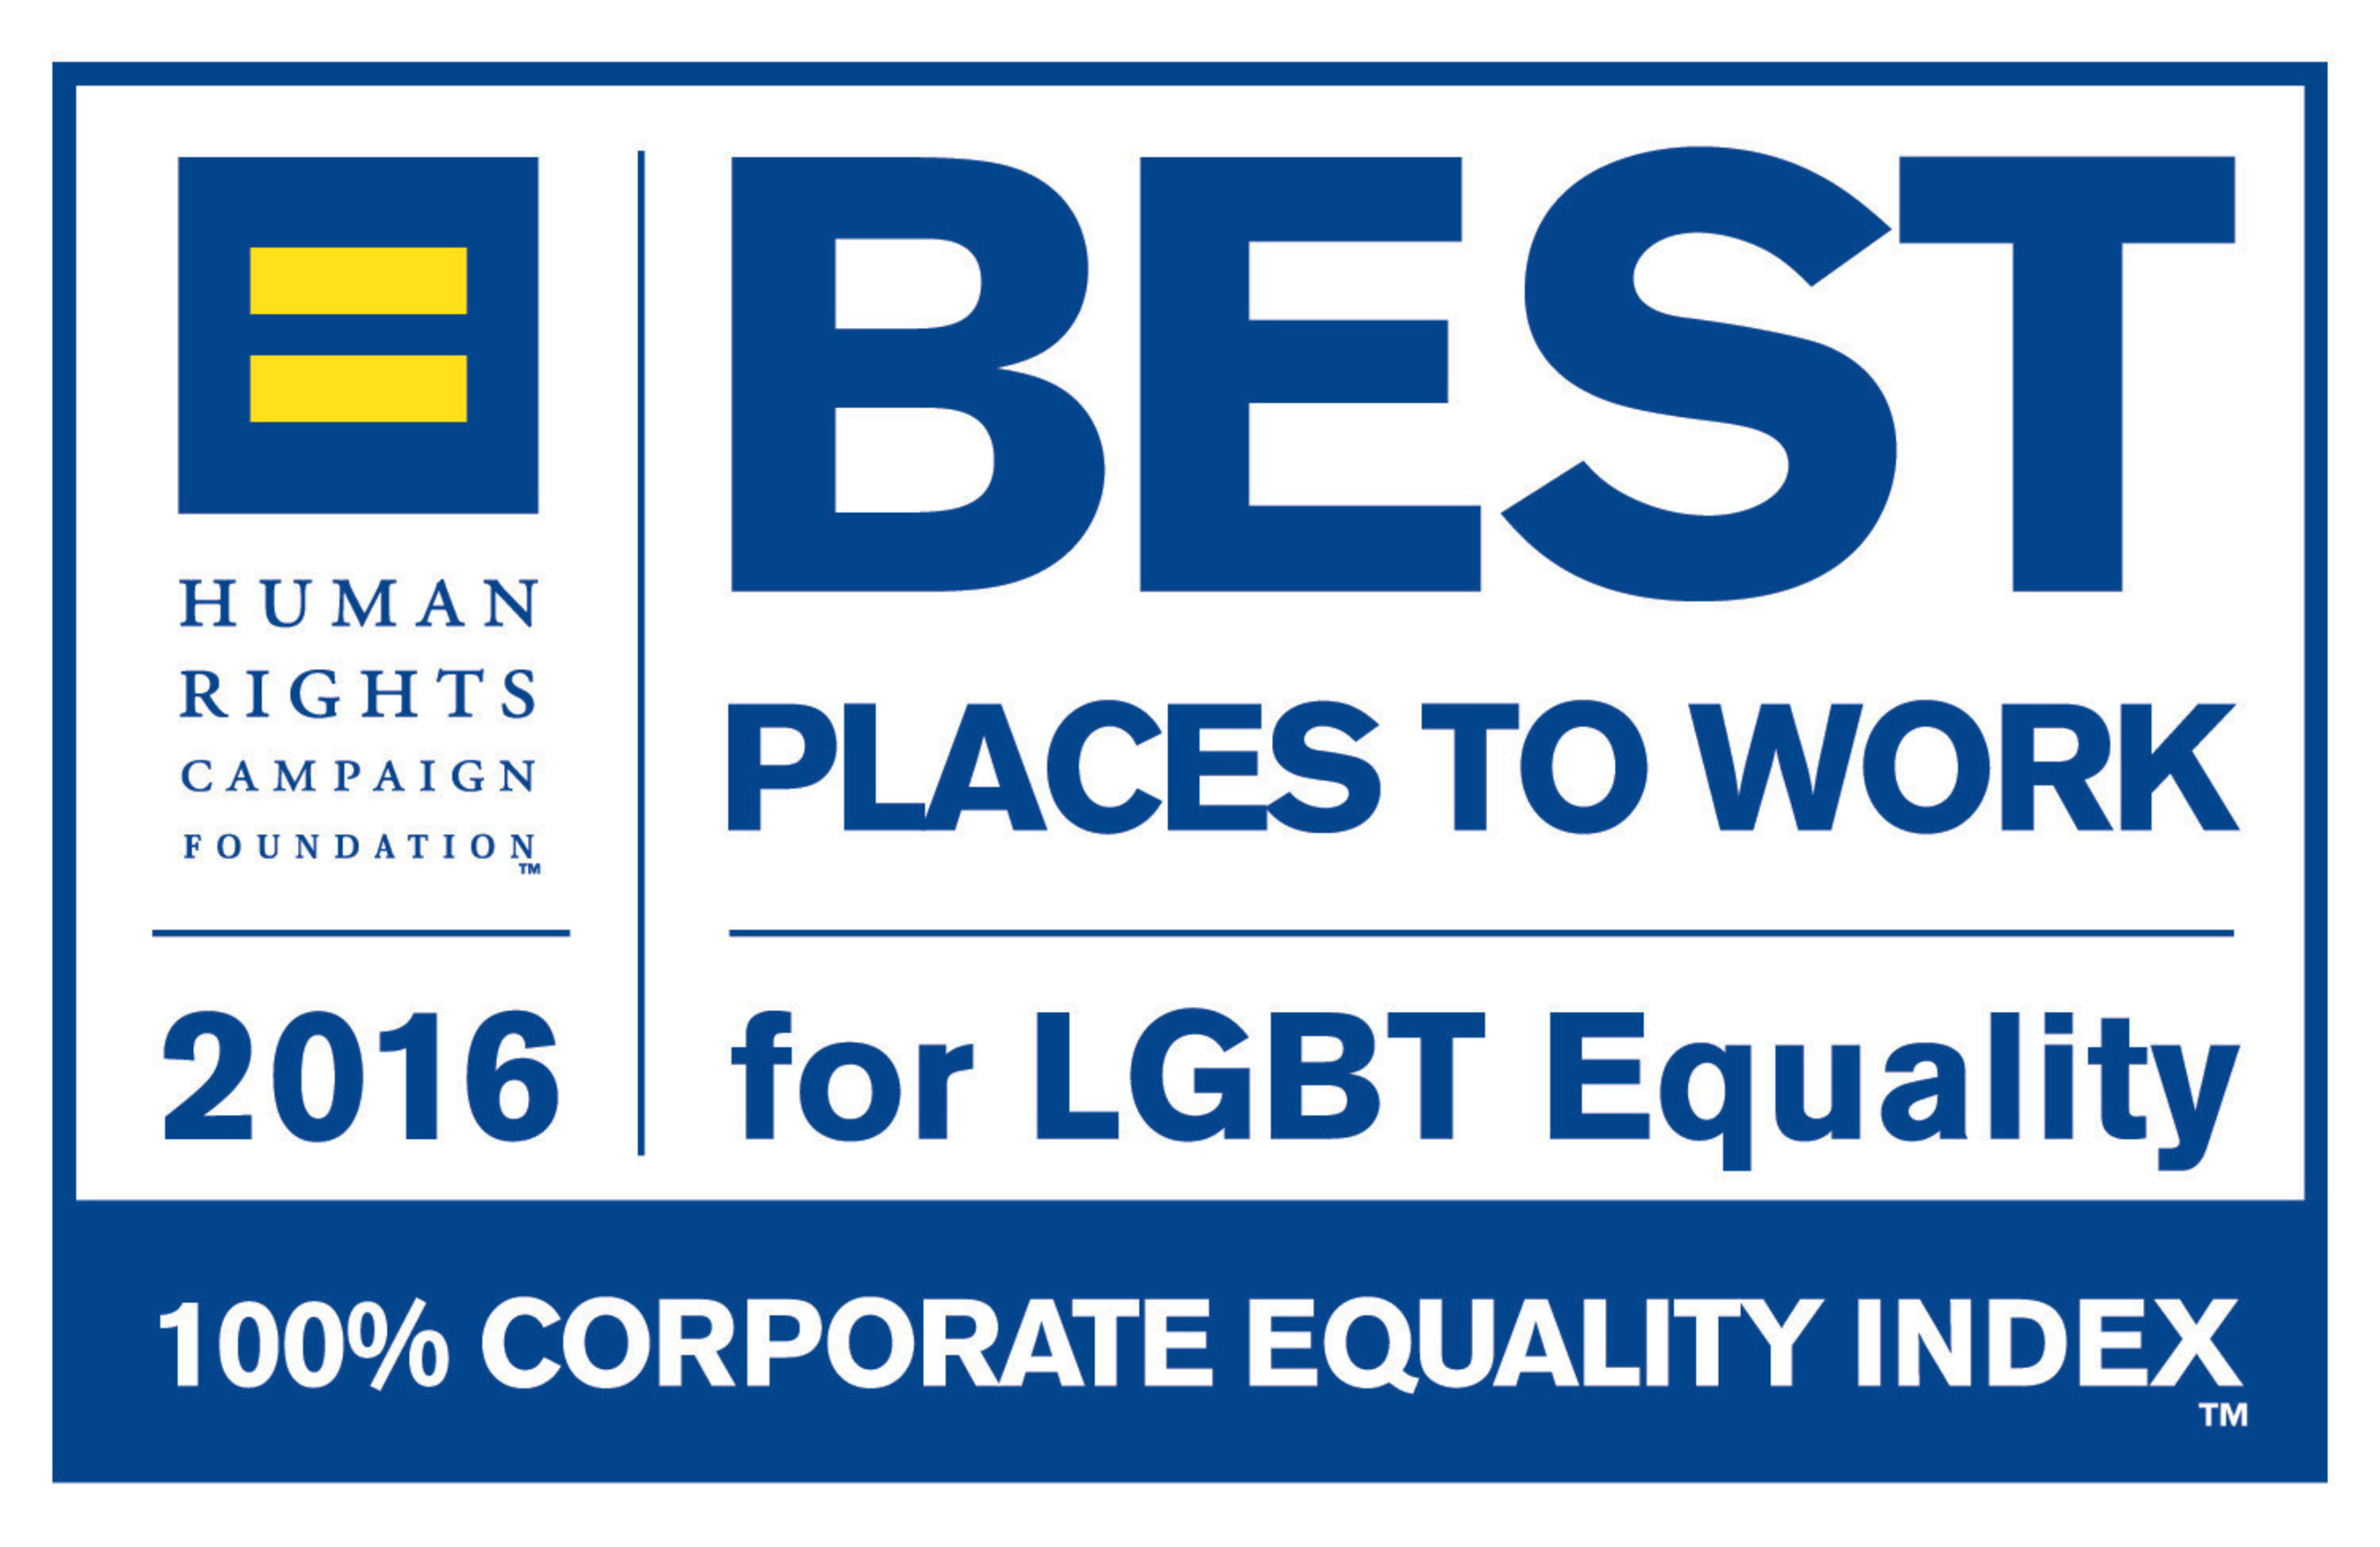 ManpowerGroup has received a perfect score of 100 percent in the 2016 Corporate Equality Index (CEI) from the Human Rights Campaign Foundation.